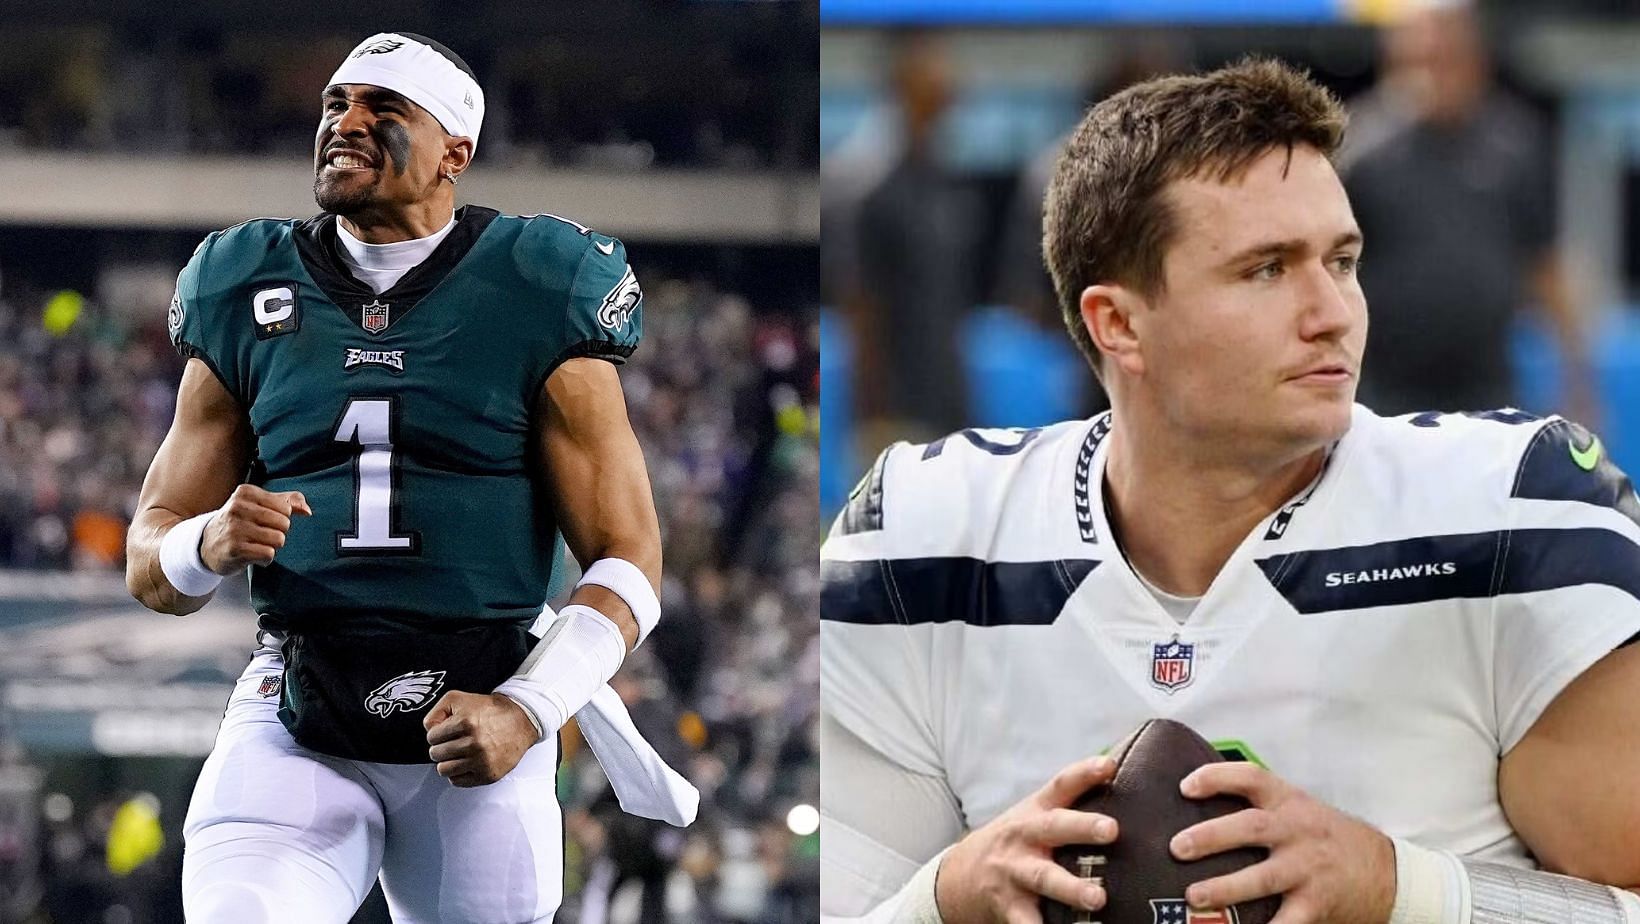 What radio station is the Eagles-Seahawks game on? Details on NFL Week 15 coverage